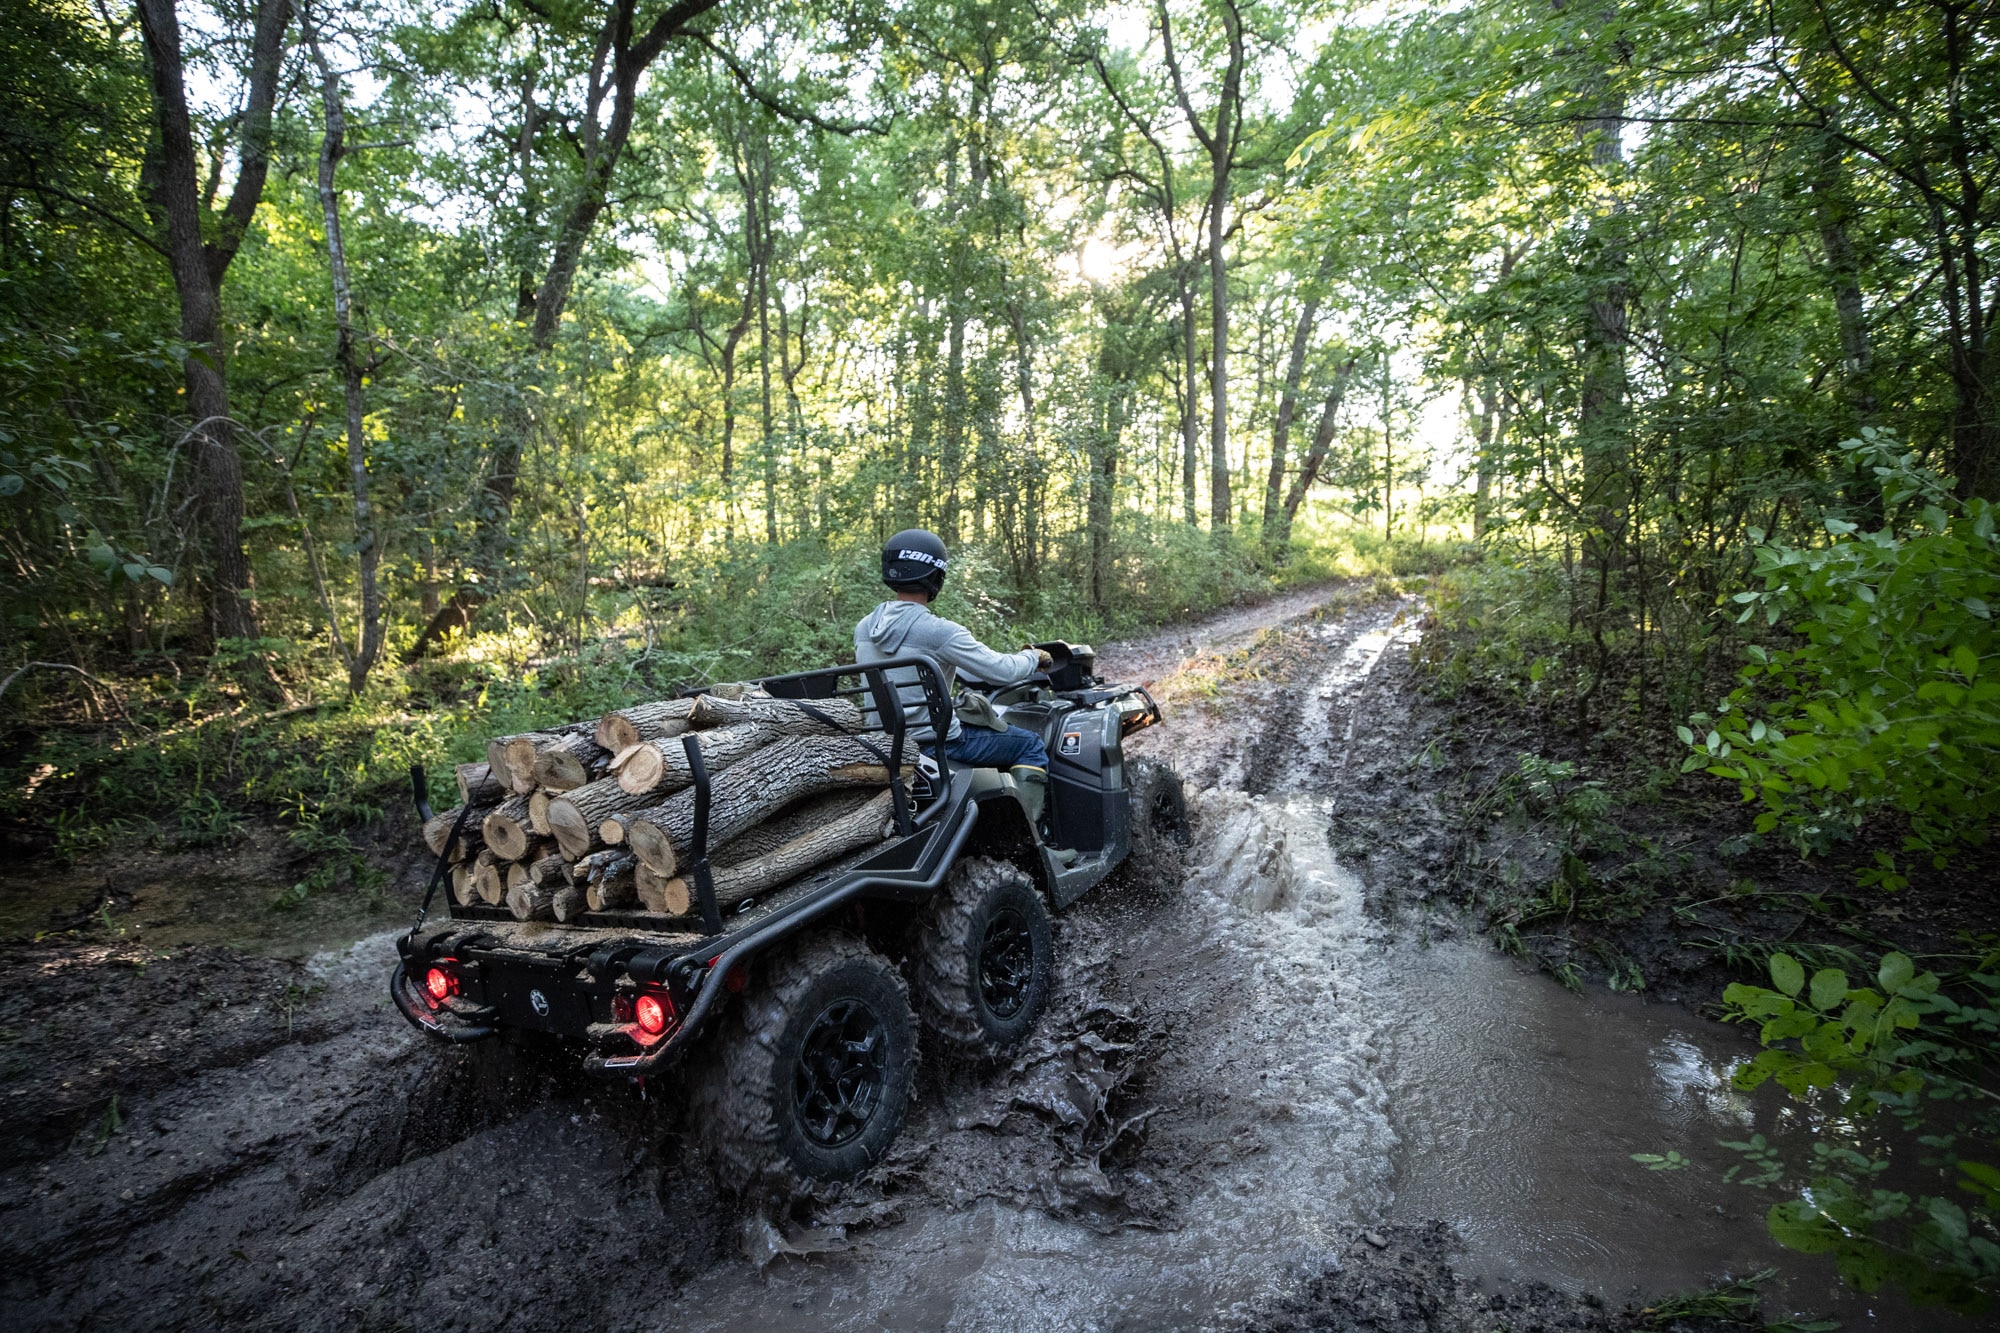 Man riding a Can-Am Outlander 6x6 XT ATV in the mud with wood in the rear rack